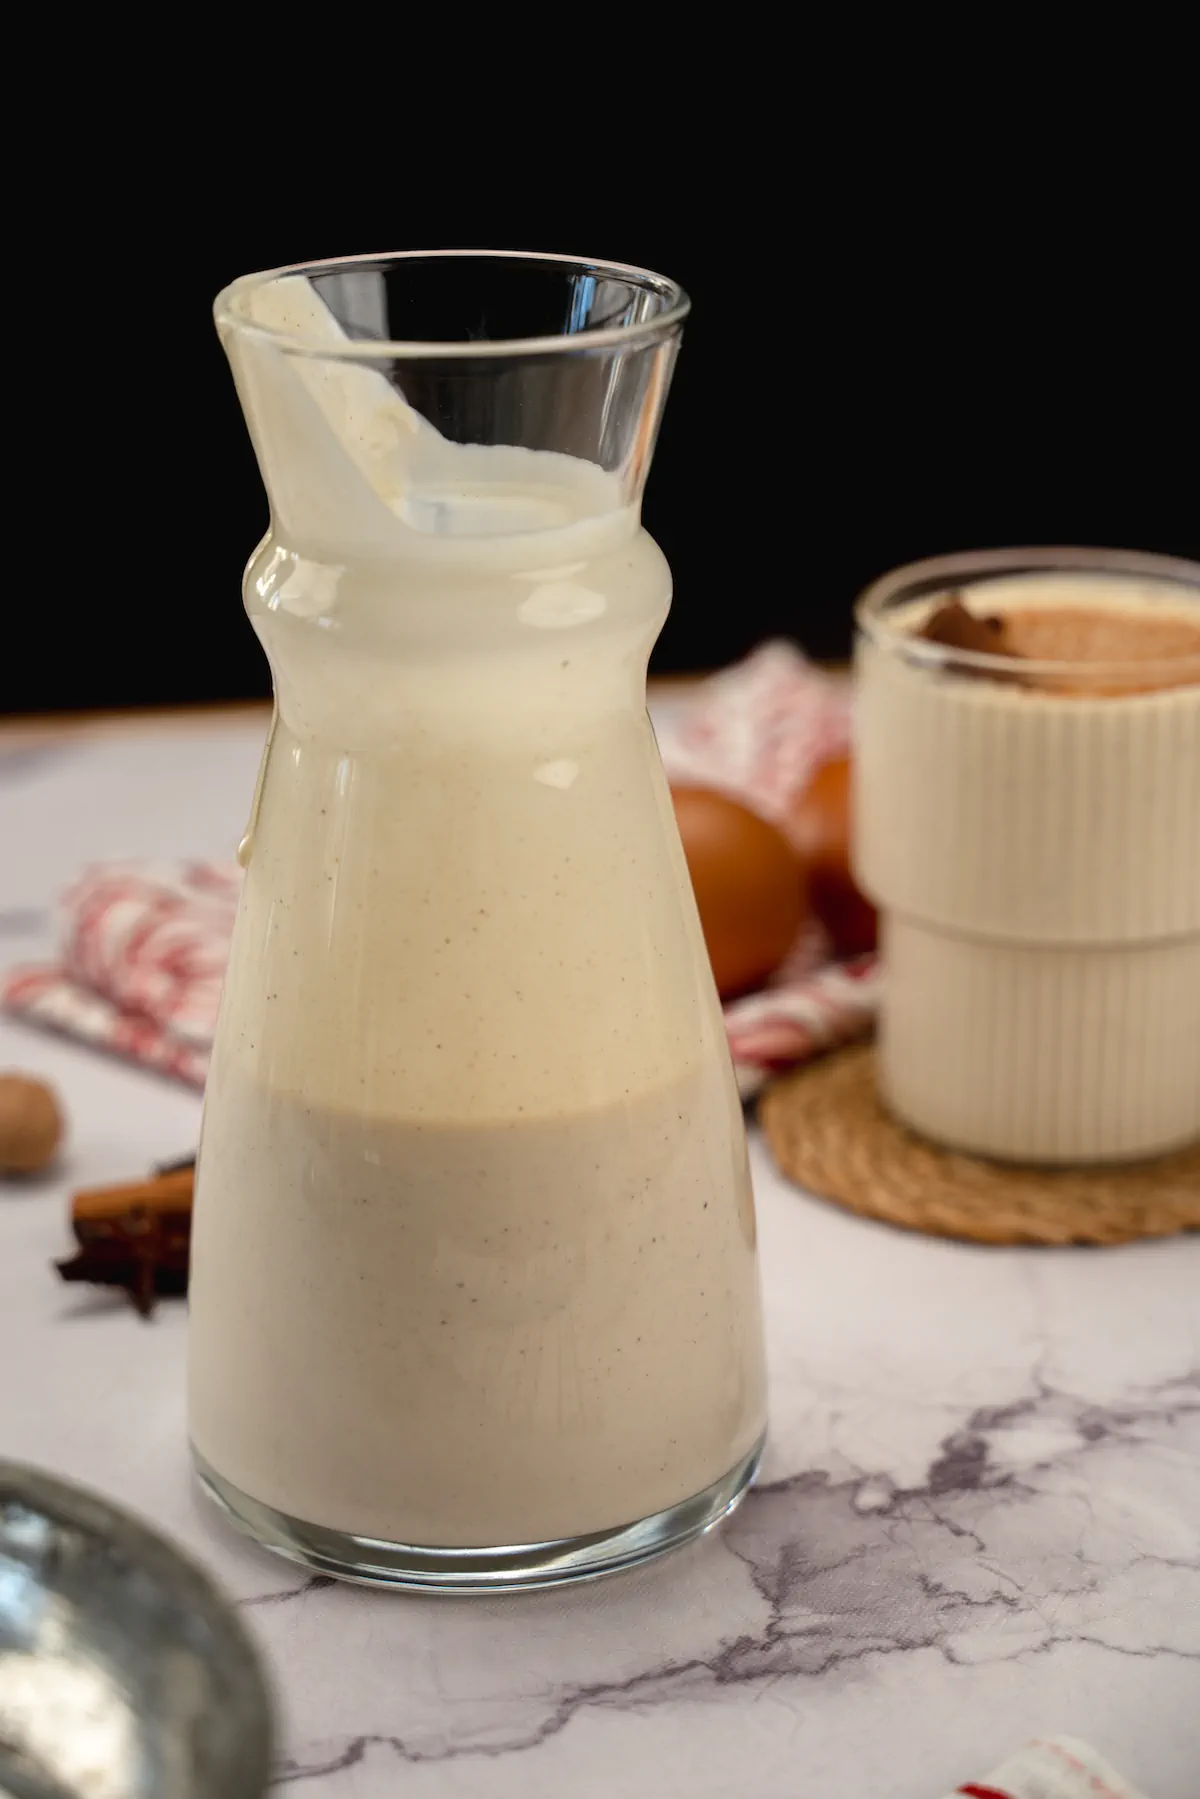 A glass jar half-filled with eggnog and a serving of eggnog is in the background.